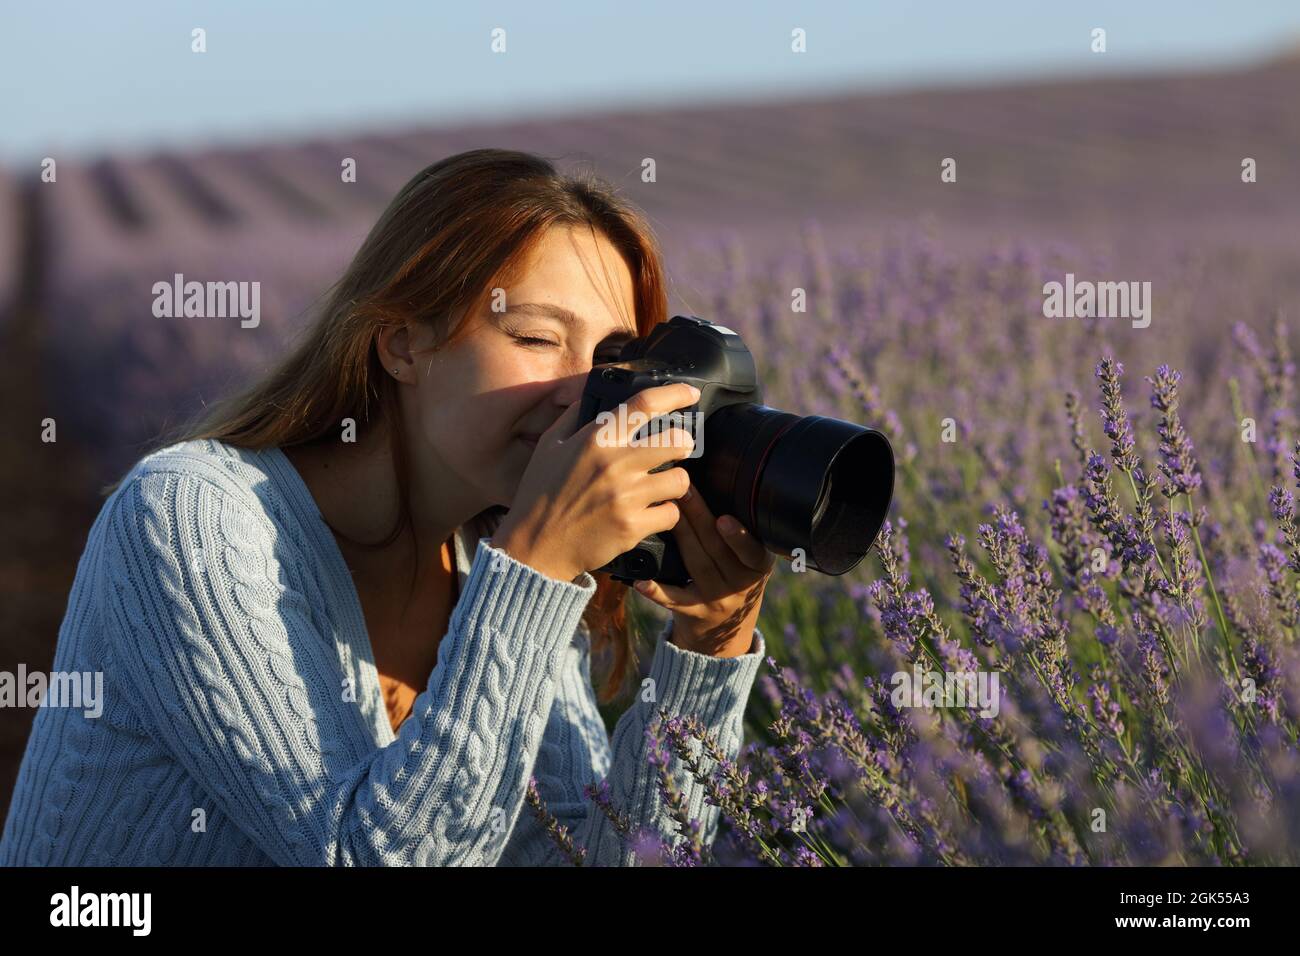 Woman photographing lavender flowers with dslr camera in a beautiful field Stock Photo